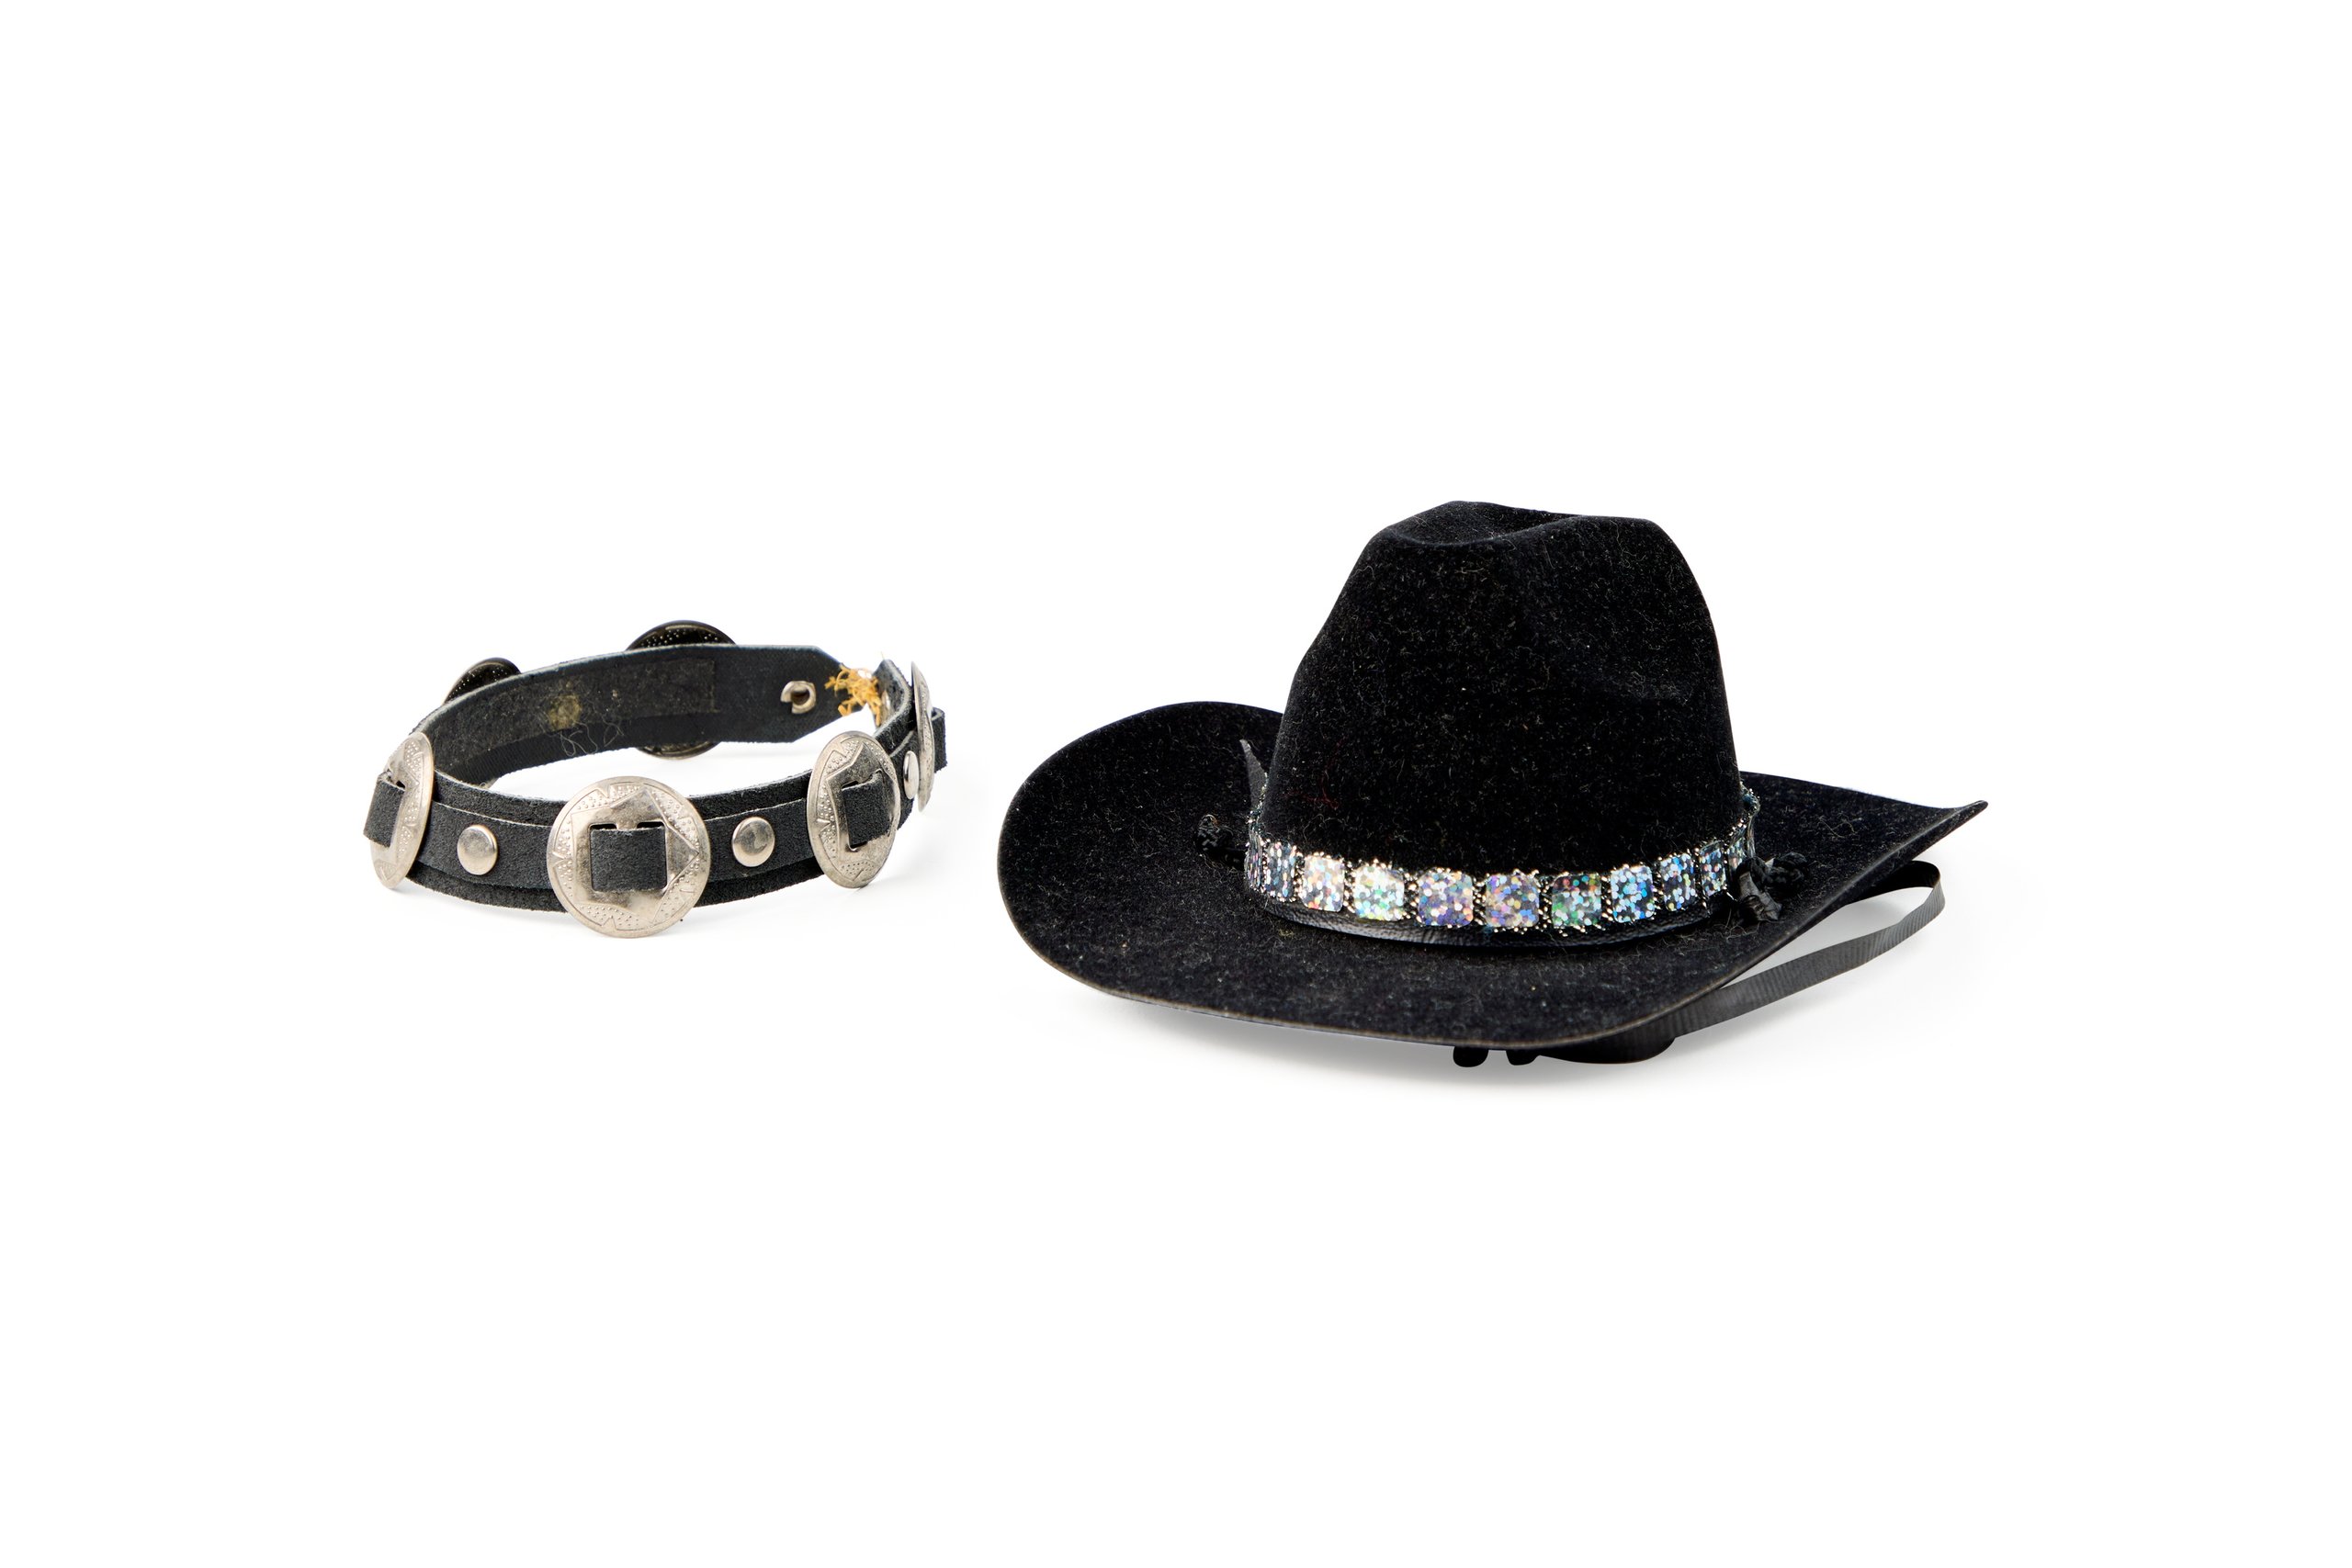 Dogs cowboy hat and hat band used by Edward Bear